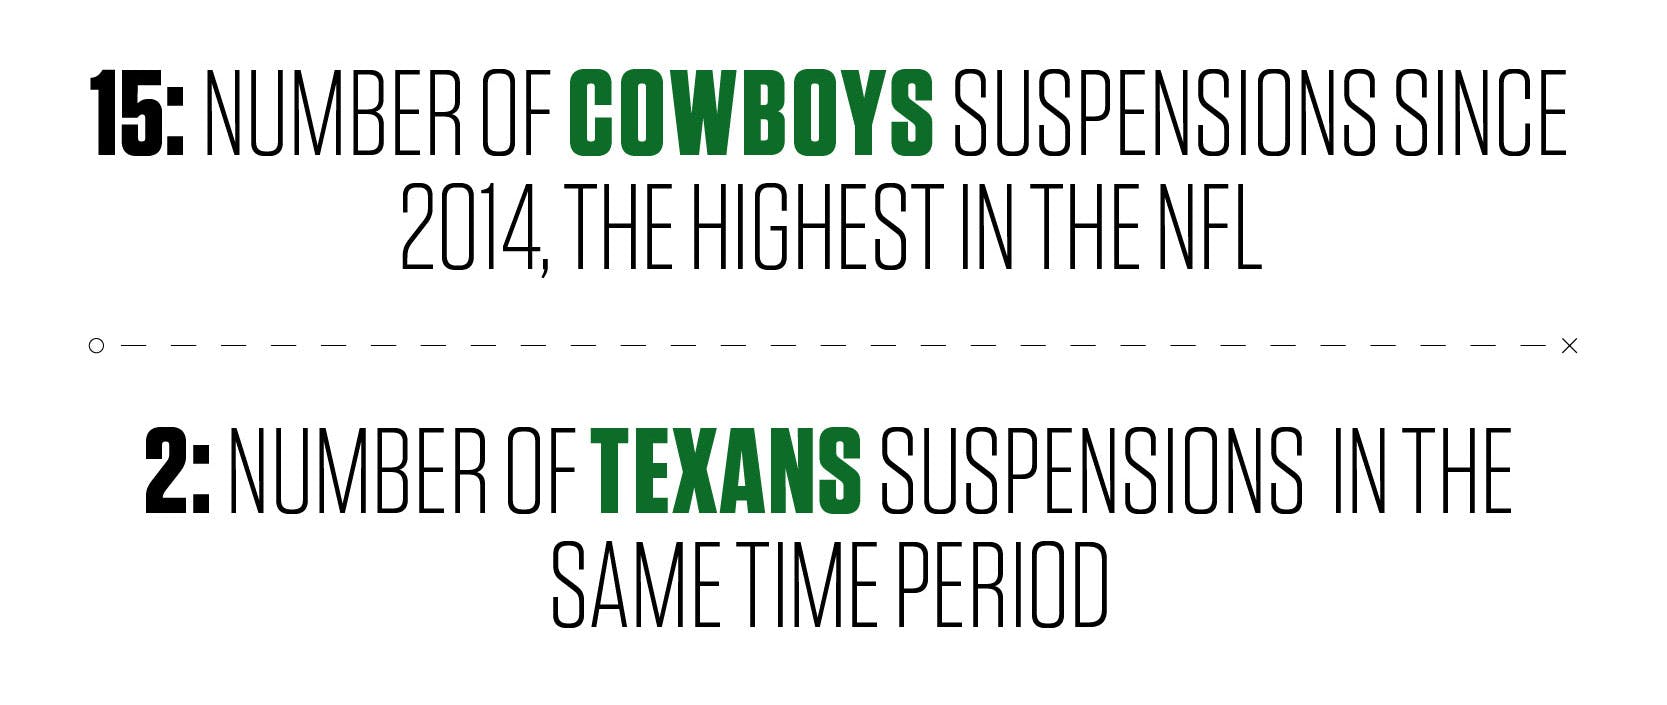 15: Number of Cowboys suspensions since 2014, the highest in the NFL. 2: Number of Texans suspensions in the same time period.